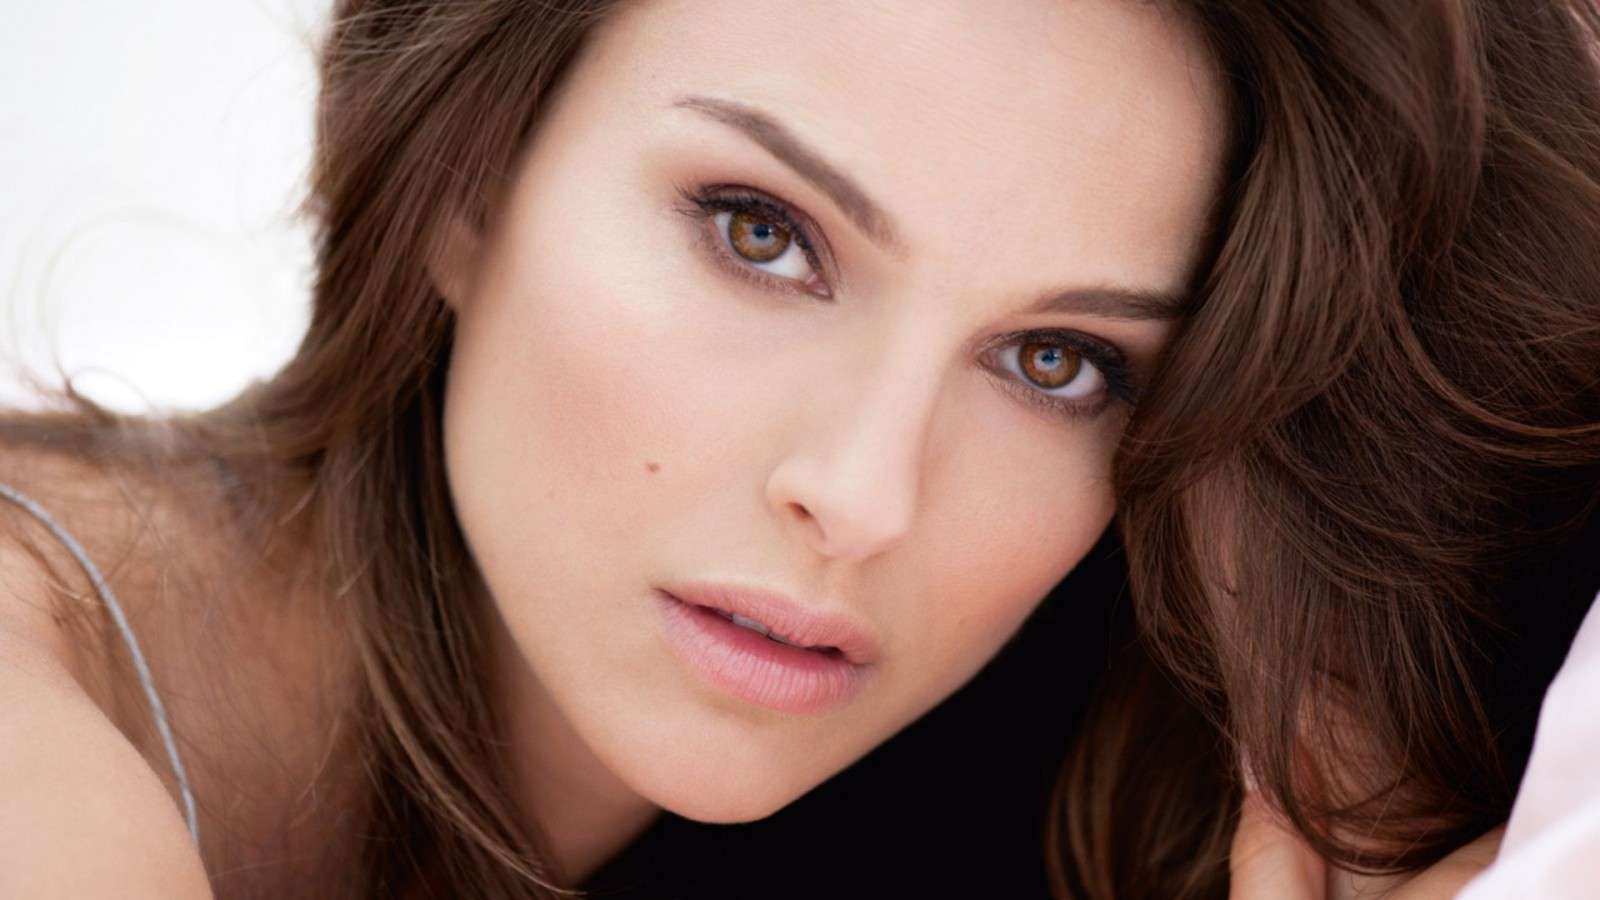 RevContent Ad Example 64020 - Natalie Portman's Real Looks - Unravelling The Deep Secrets